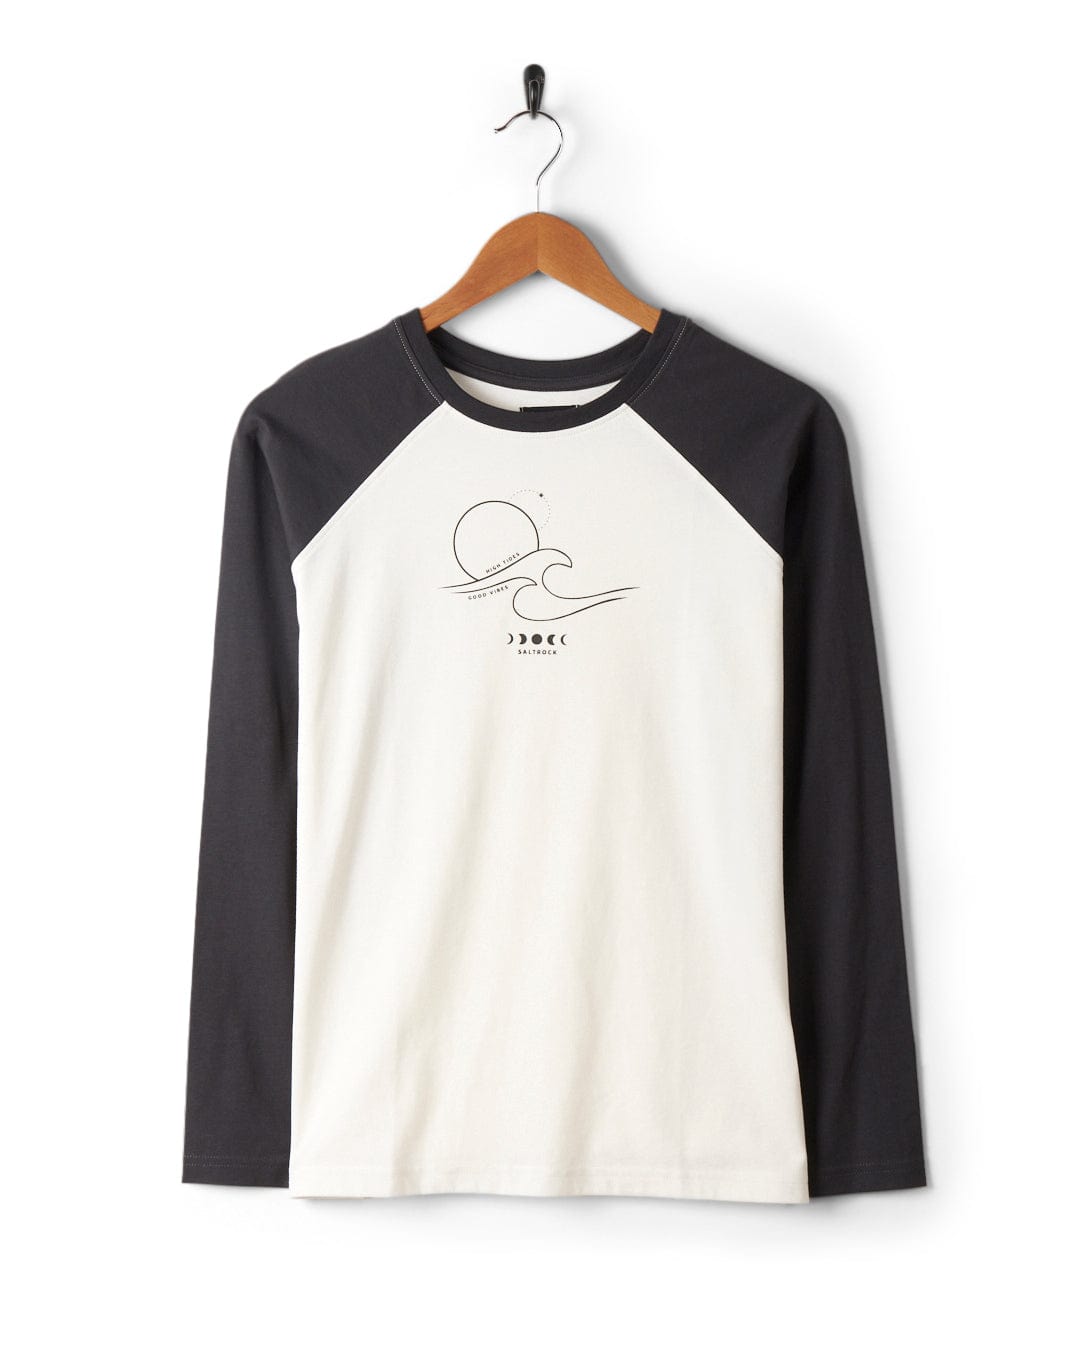 A white cotton raglan t-shirt featuring a graphic of a surfboard on the front.
Product Name: Saltrock - High Tides Womens Raglan Long Sleeve T-Shirt - White